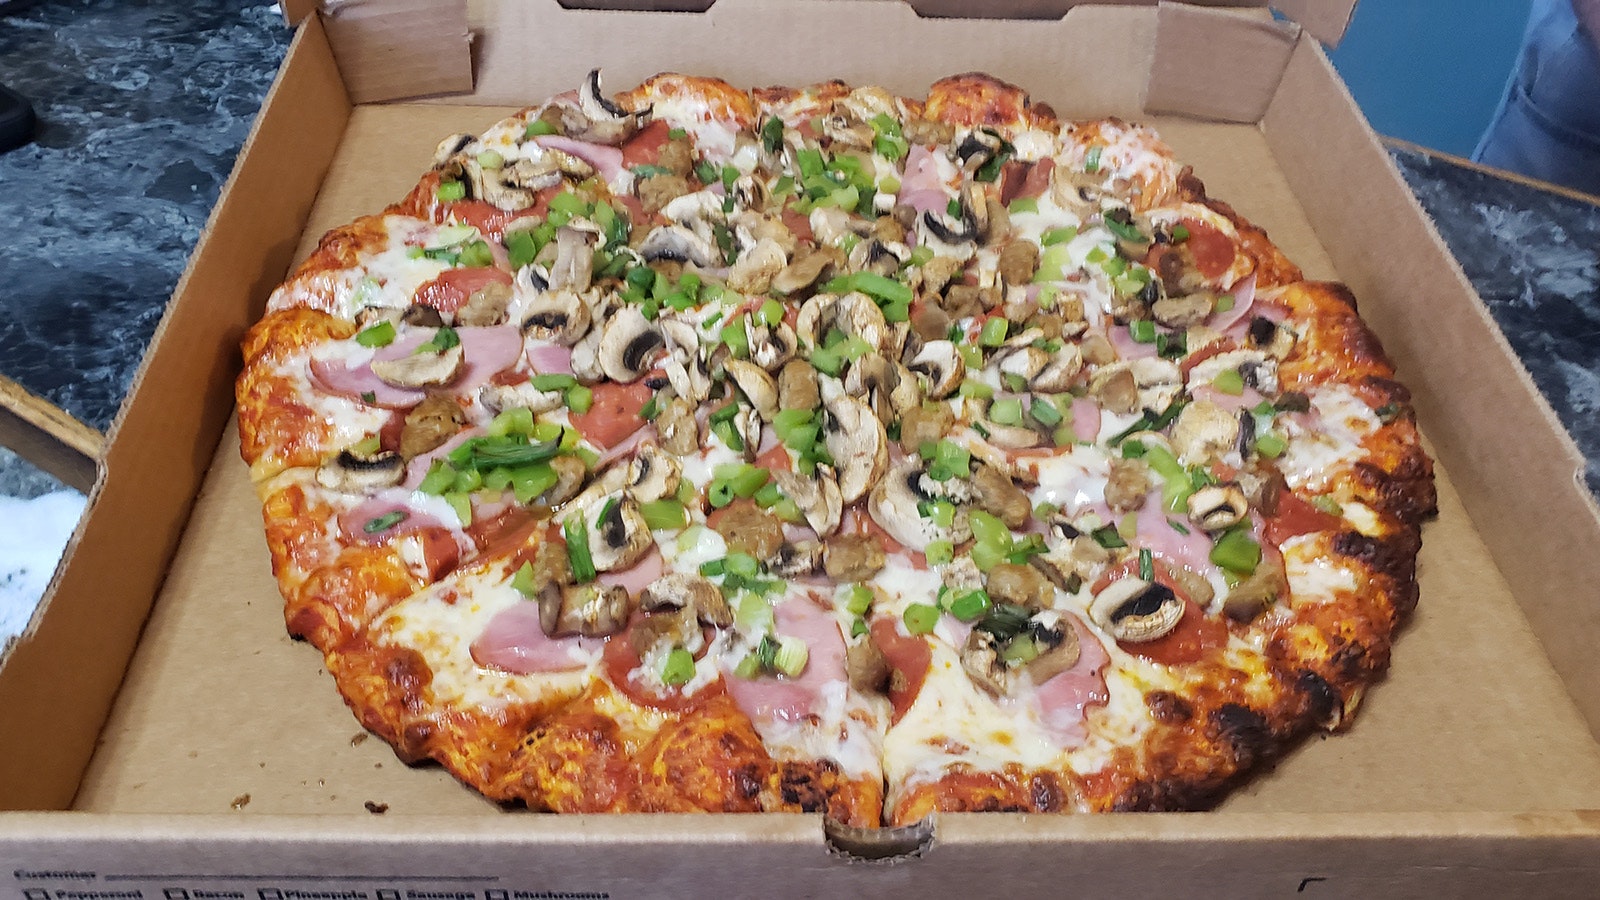 Scroungy Moose Pizza isnt skimpy with the toppings.